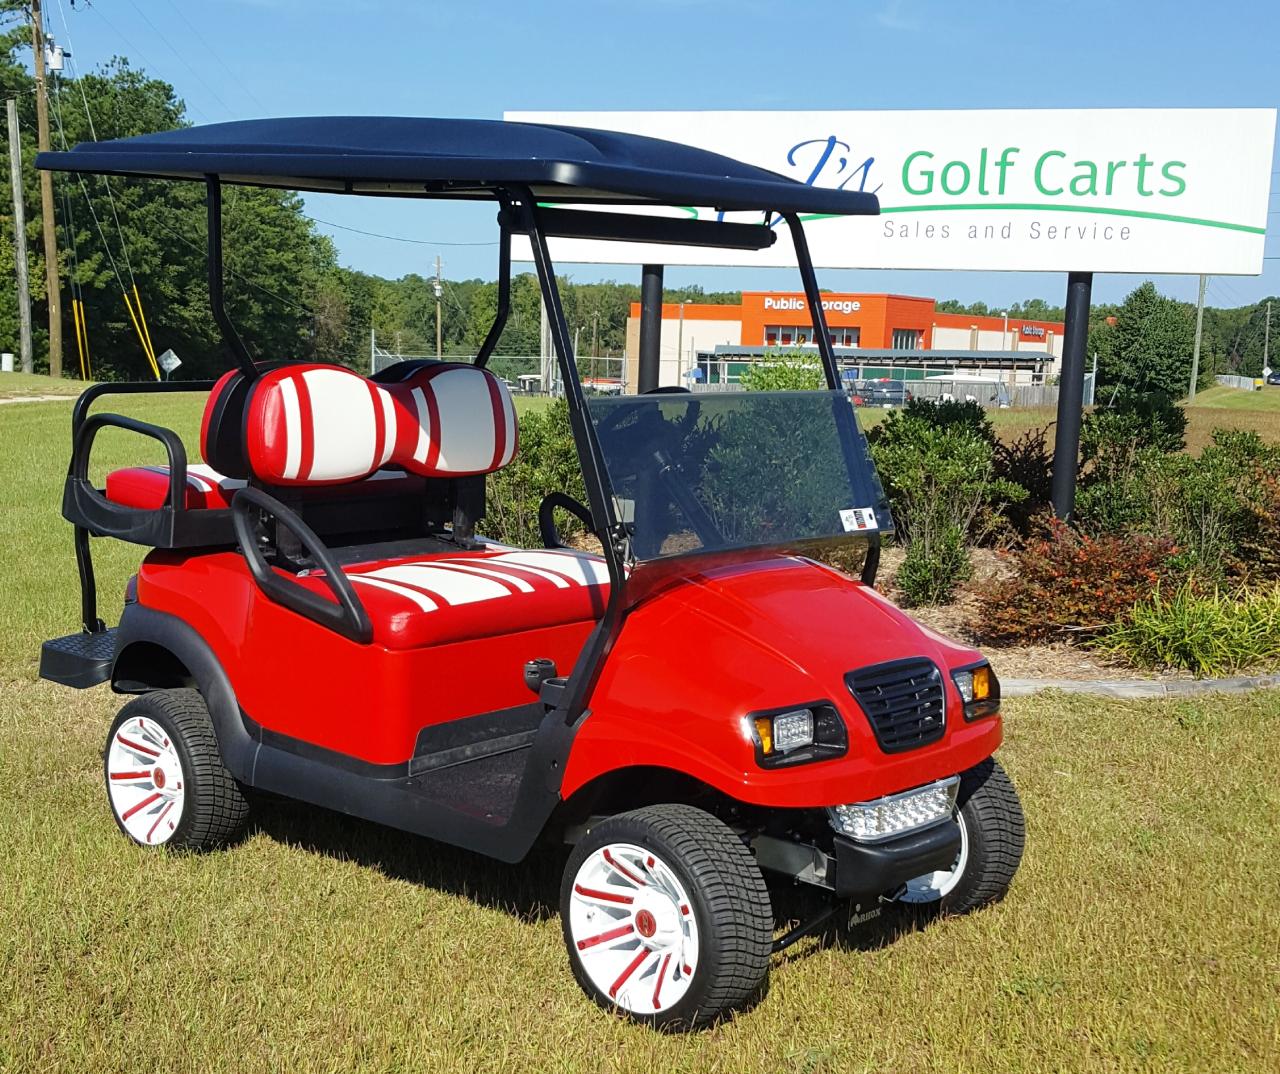 Own Your Dream Ride: Used Golf Carts for Sale in Brown, Wisconsin